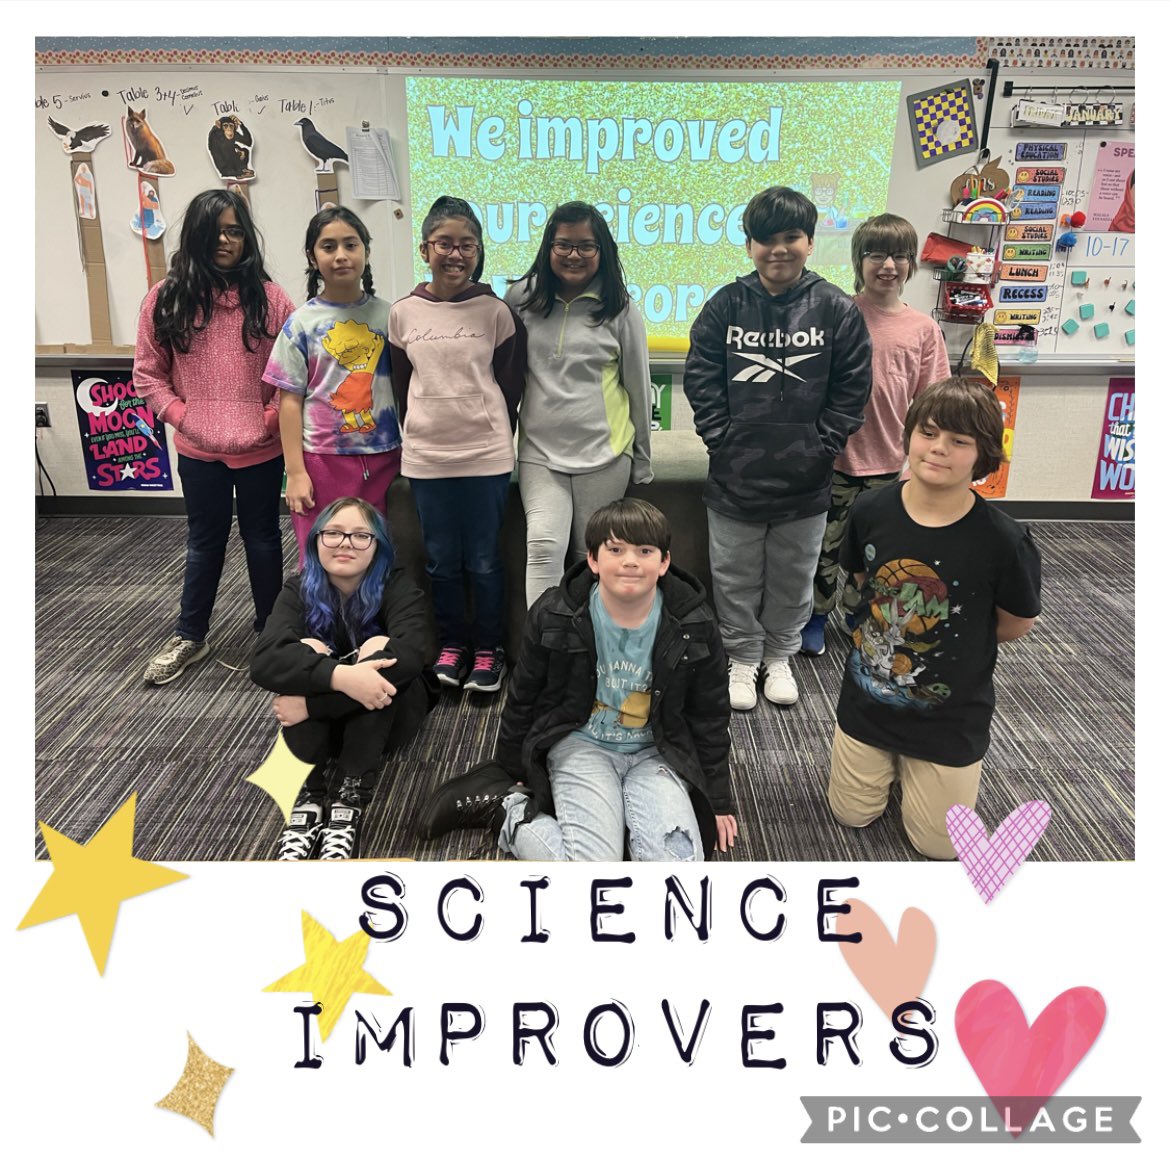 we kicked NWEA’s butt! these @McClelland_ES bears focused on making an improvement from their fall scores and these kids succeeded! testing is hard, but we persevered! #WeAreWayne #WeAreSmart #WeAreTestMasters